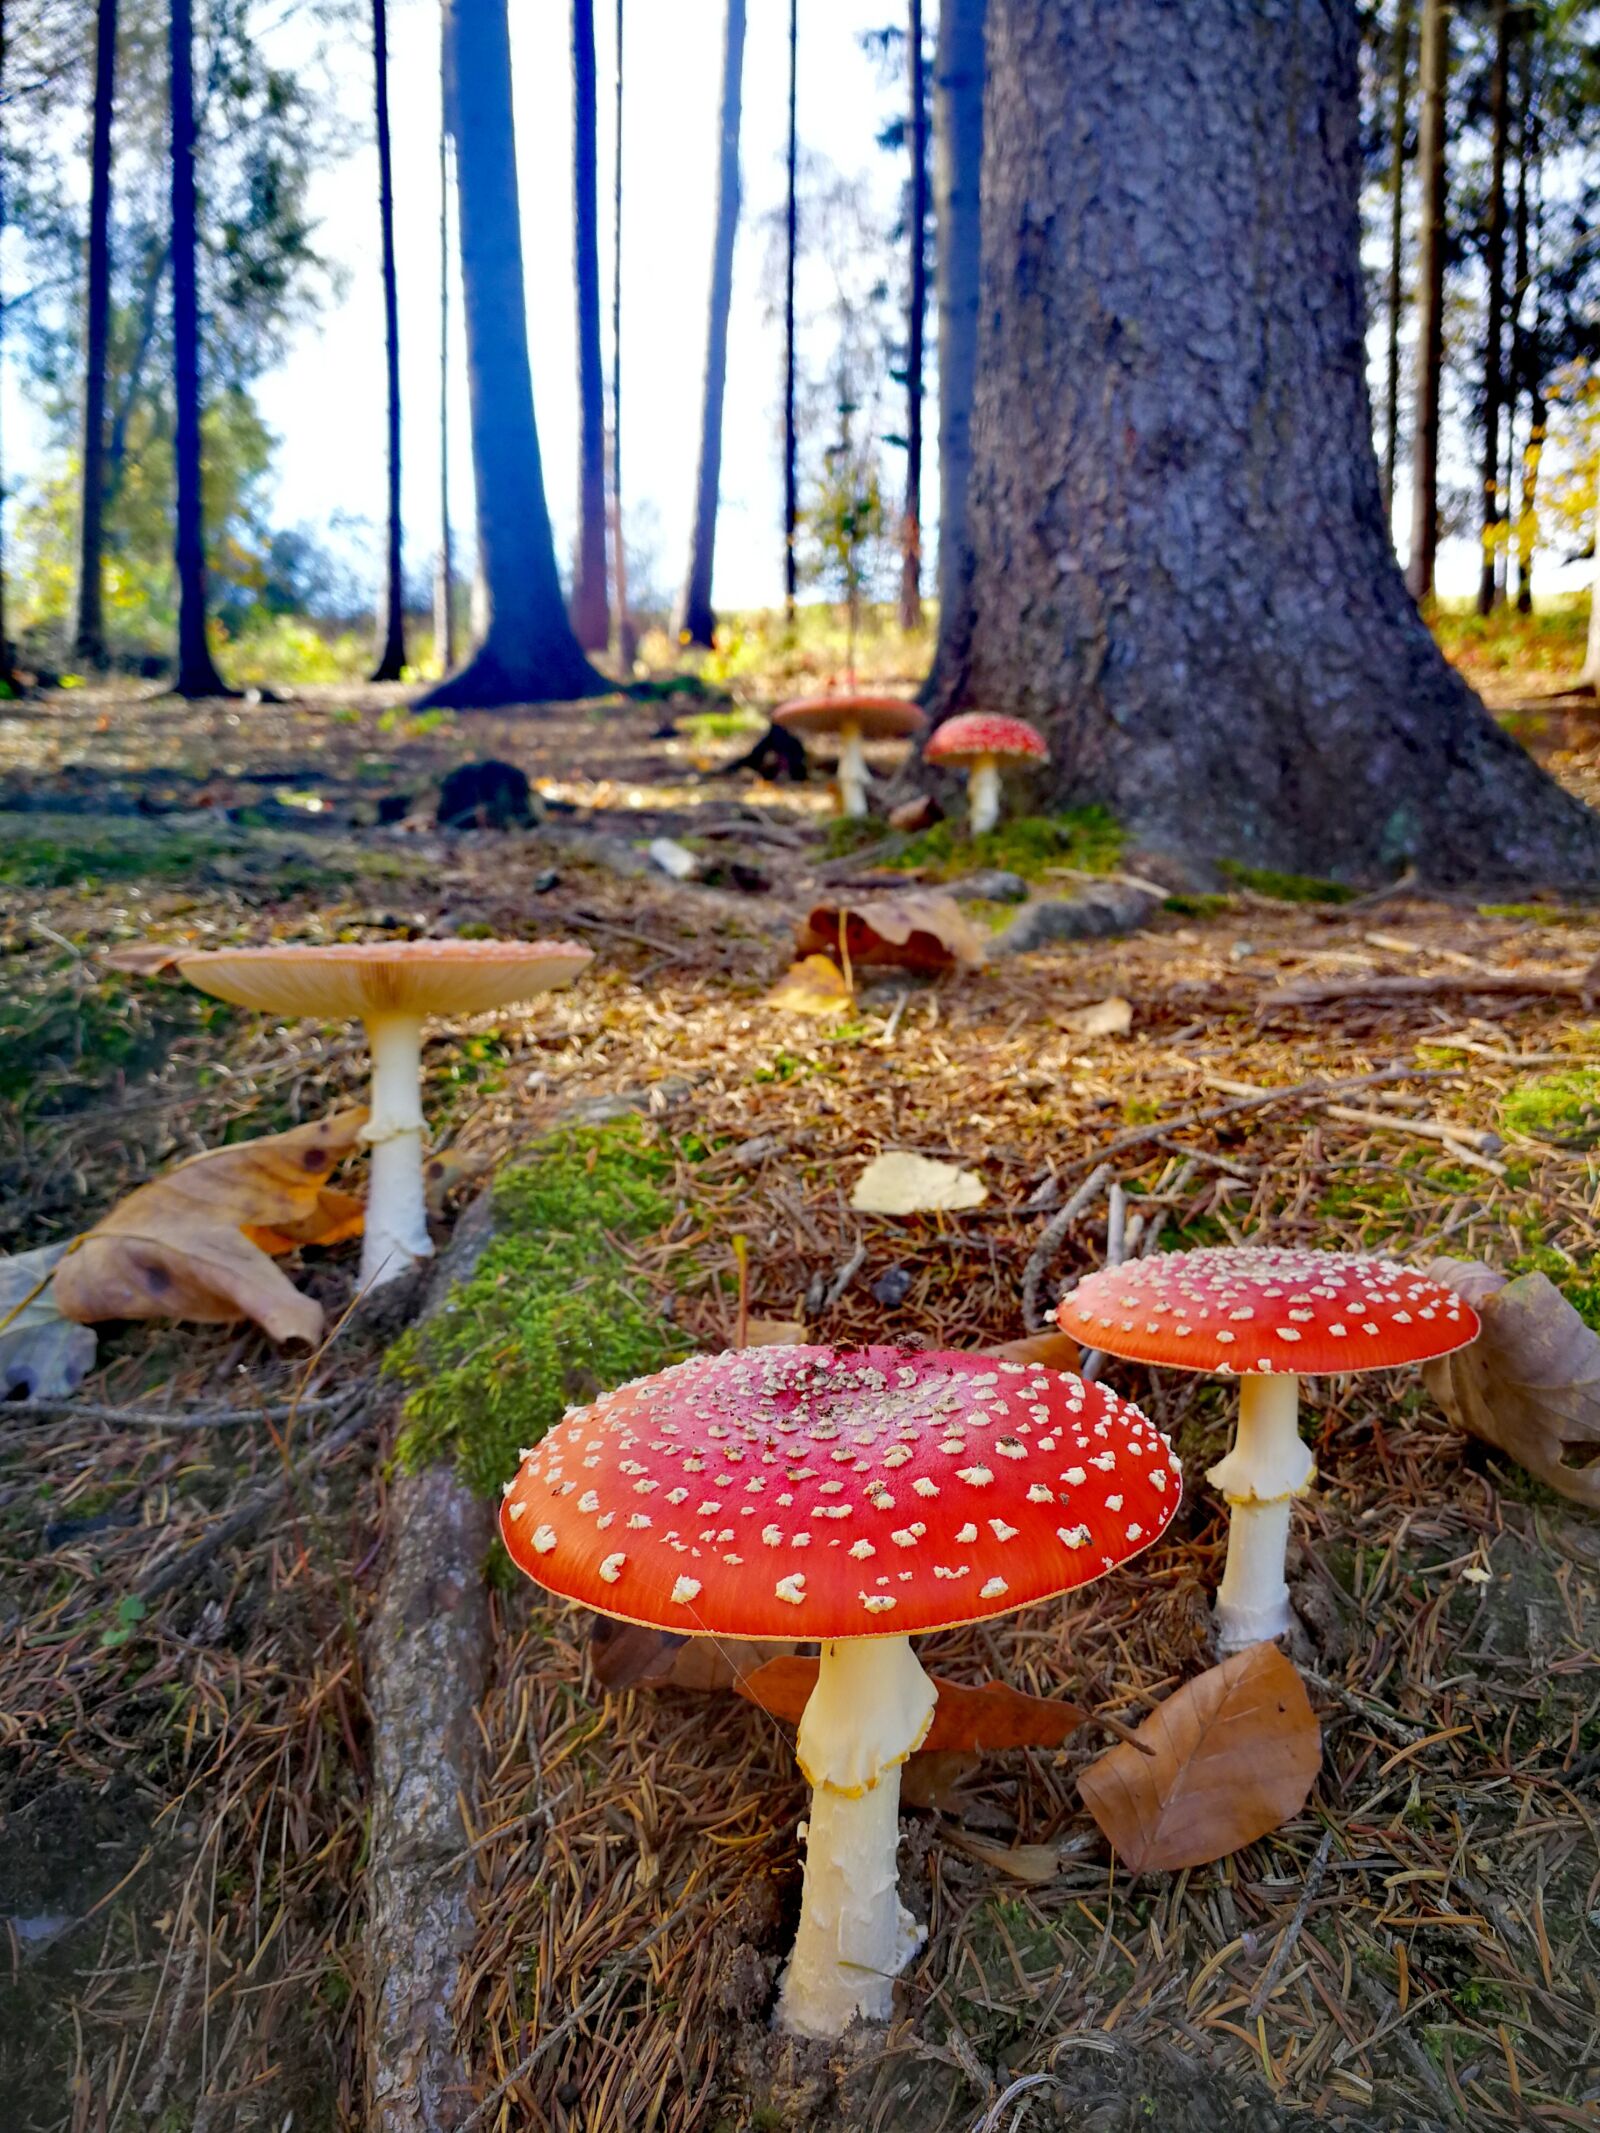 HUAWEI Mate 9 sample photo. Mushrooms, toadstool, forest photography